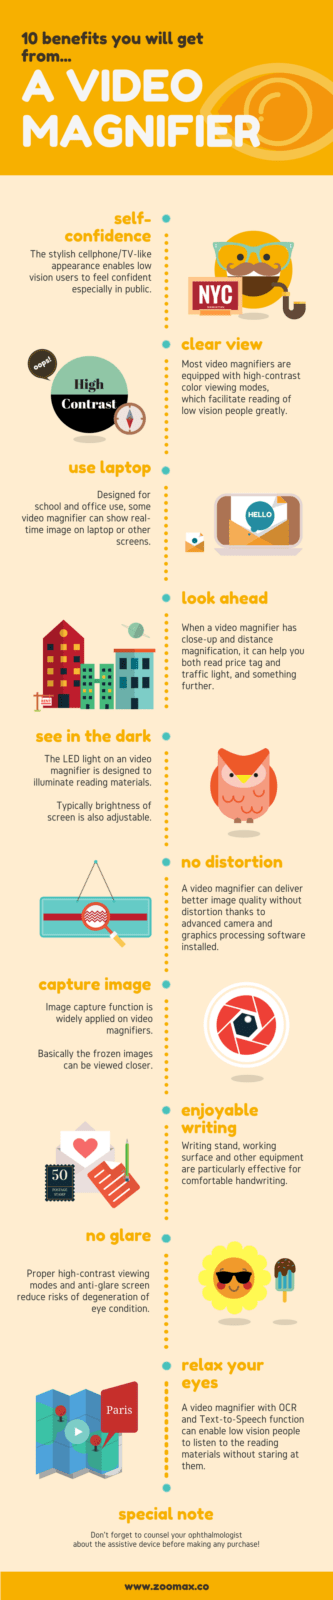 10 Benefits You Will Get From a Video Magnifier infographic